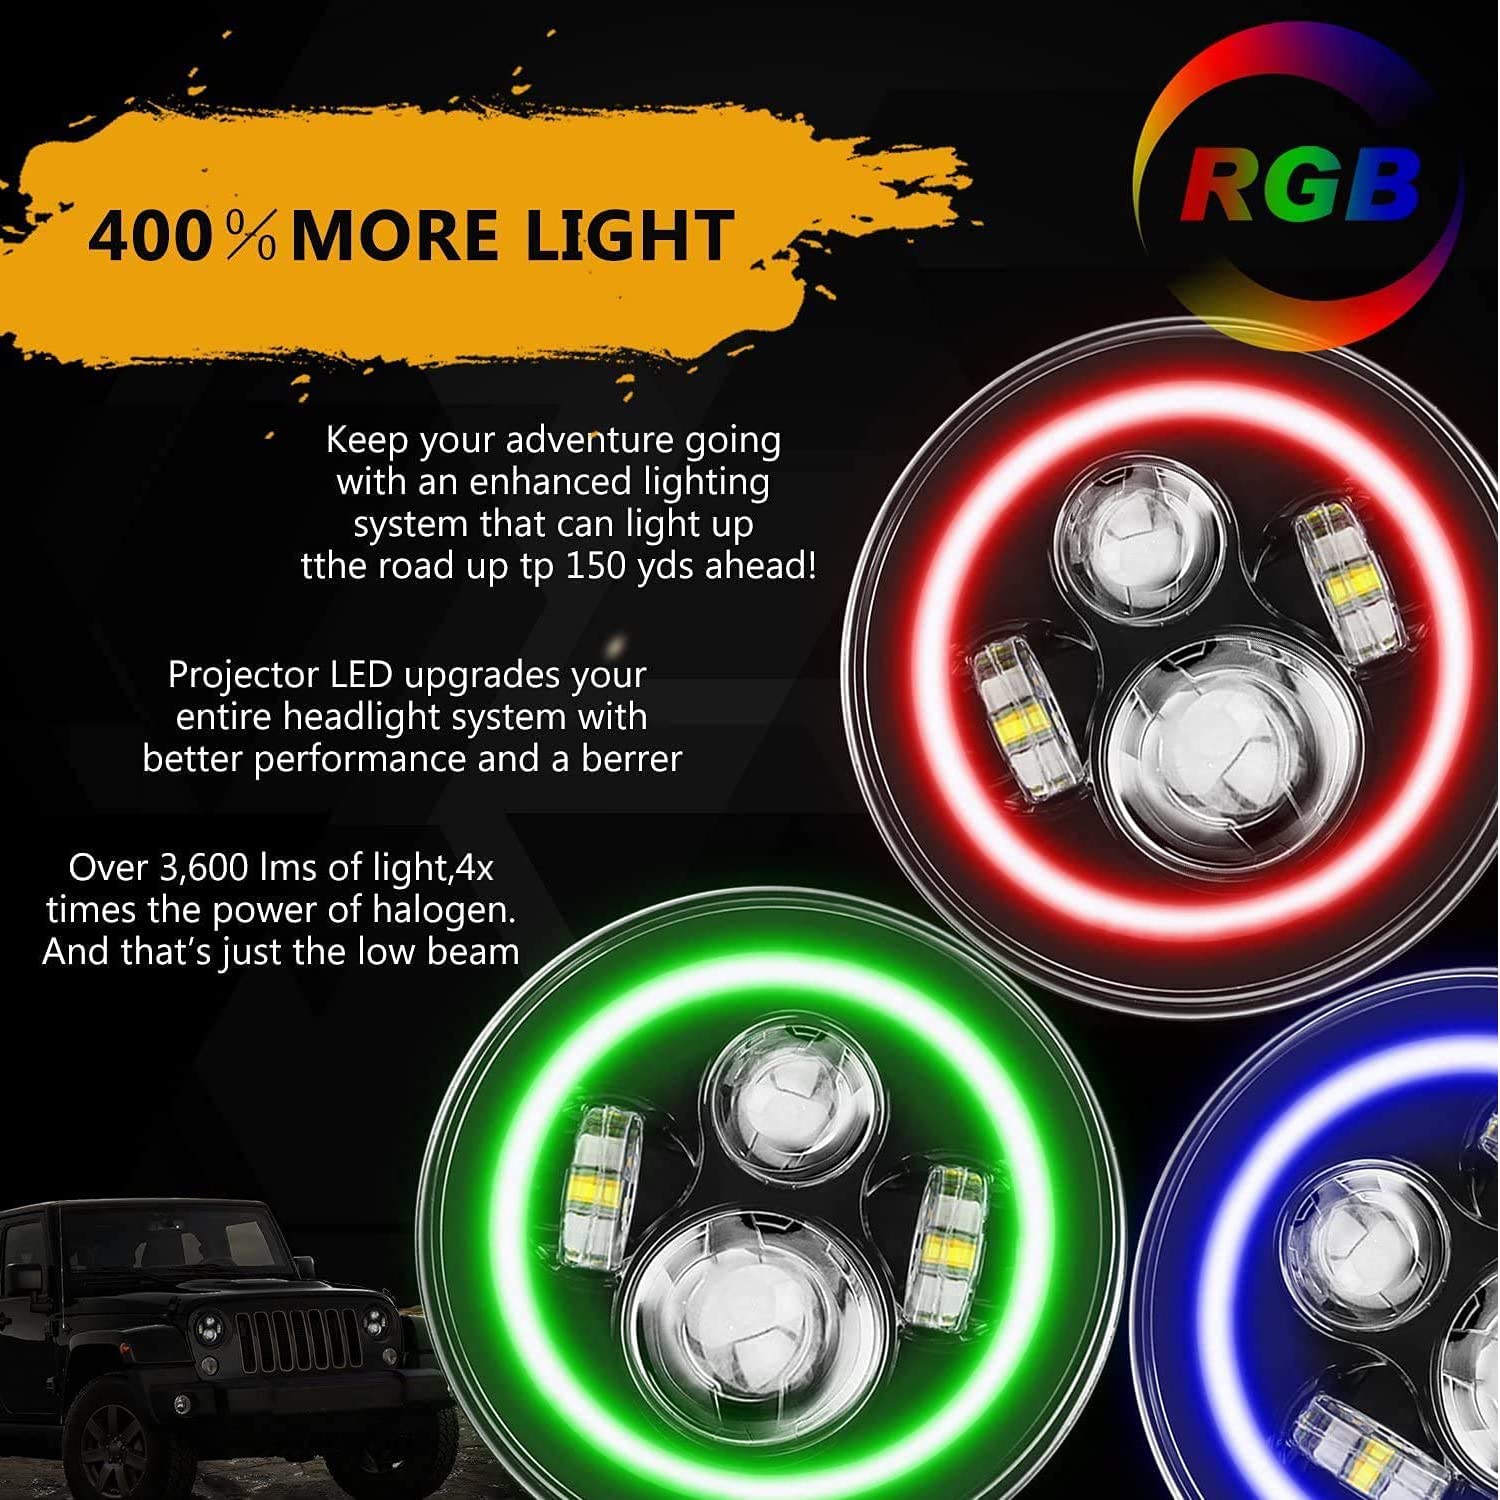 SUNPIE 7 Inch RGBW LED Halo Light Bulb IP67 Waterproof APP/Remote Control,  20 Color Changing Modes, Custom Colors, Music Mode, Voice Mode Compatible 